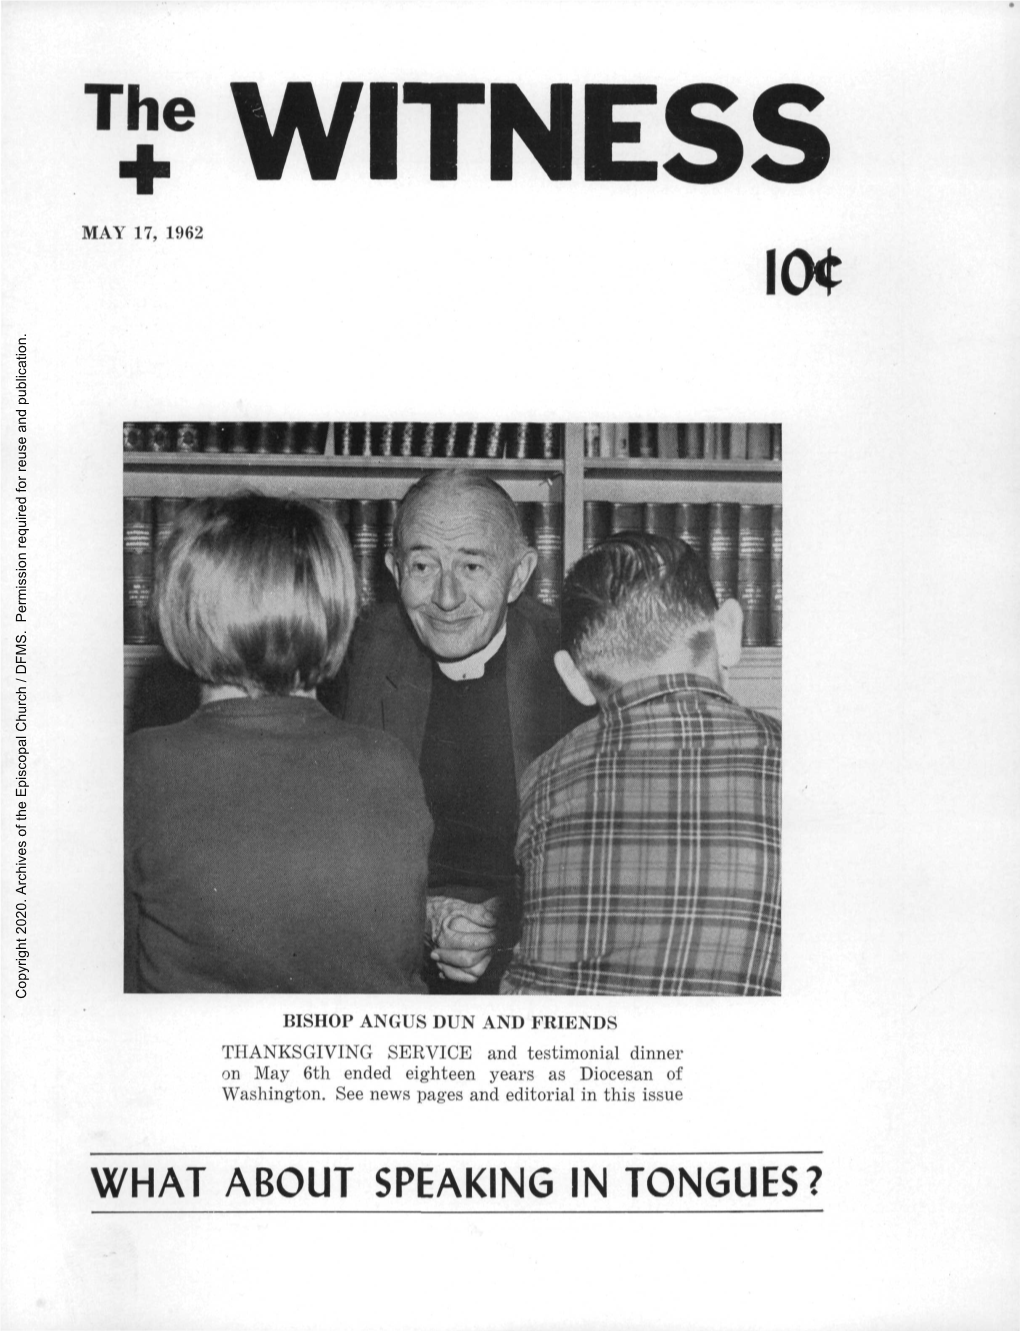 1962 the Witness, Vol. 47, No. 19